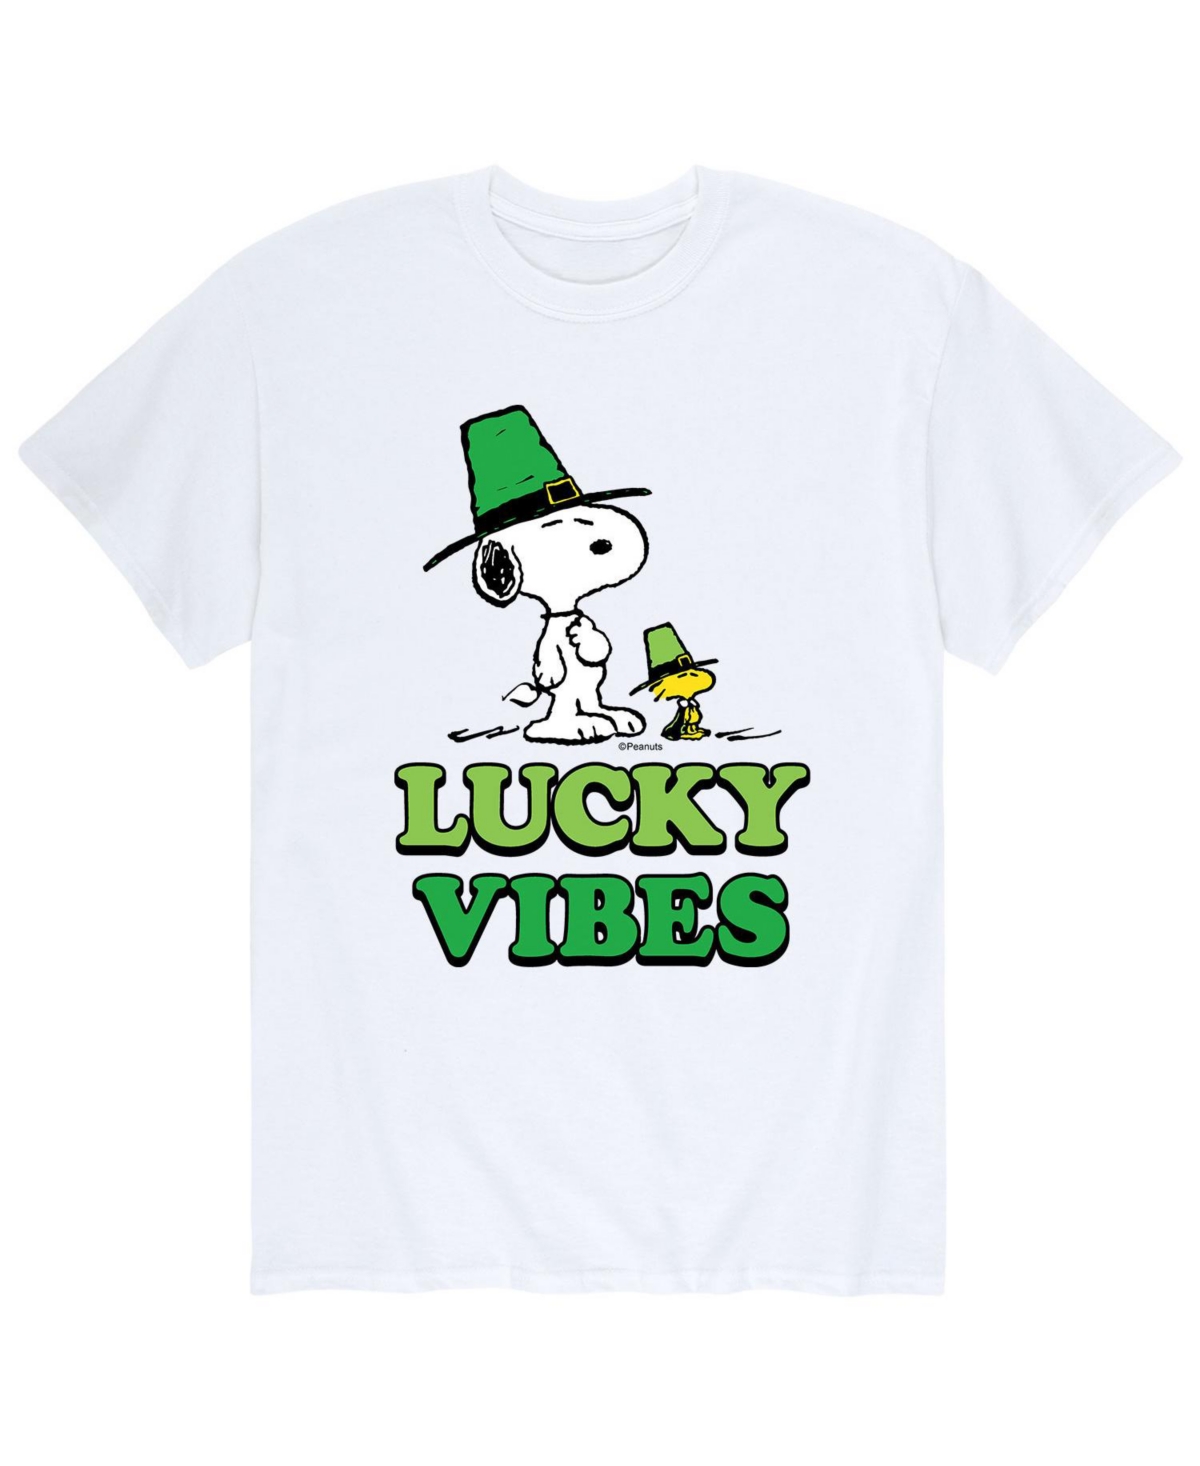 Men's Peanuts Lucky Vibes T-Shirt - White